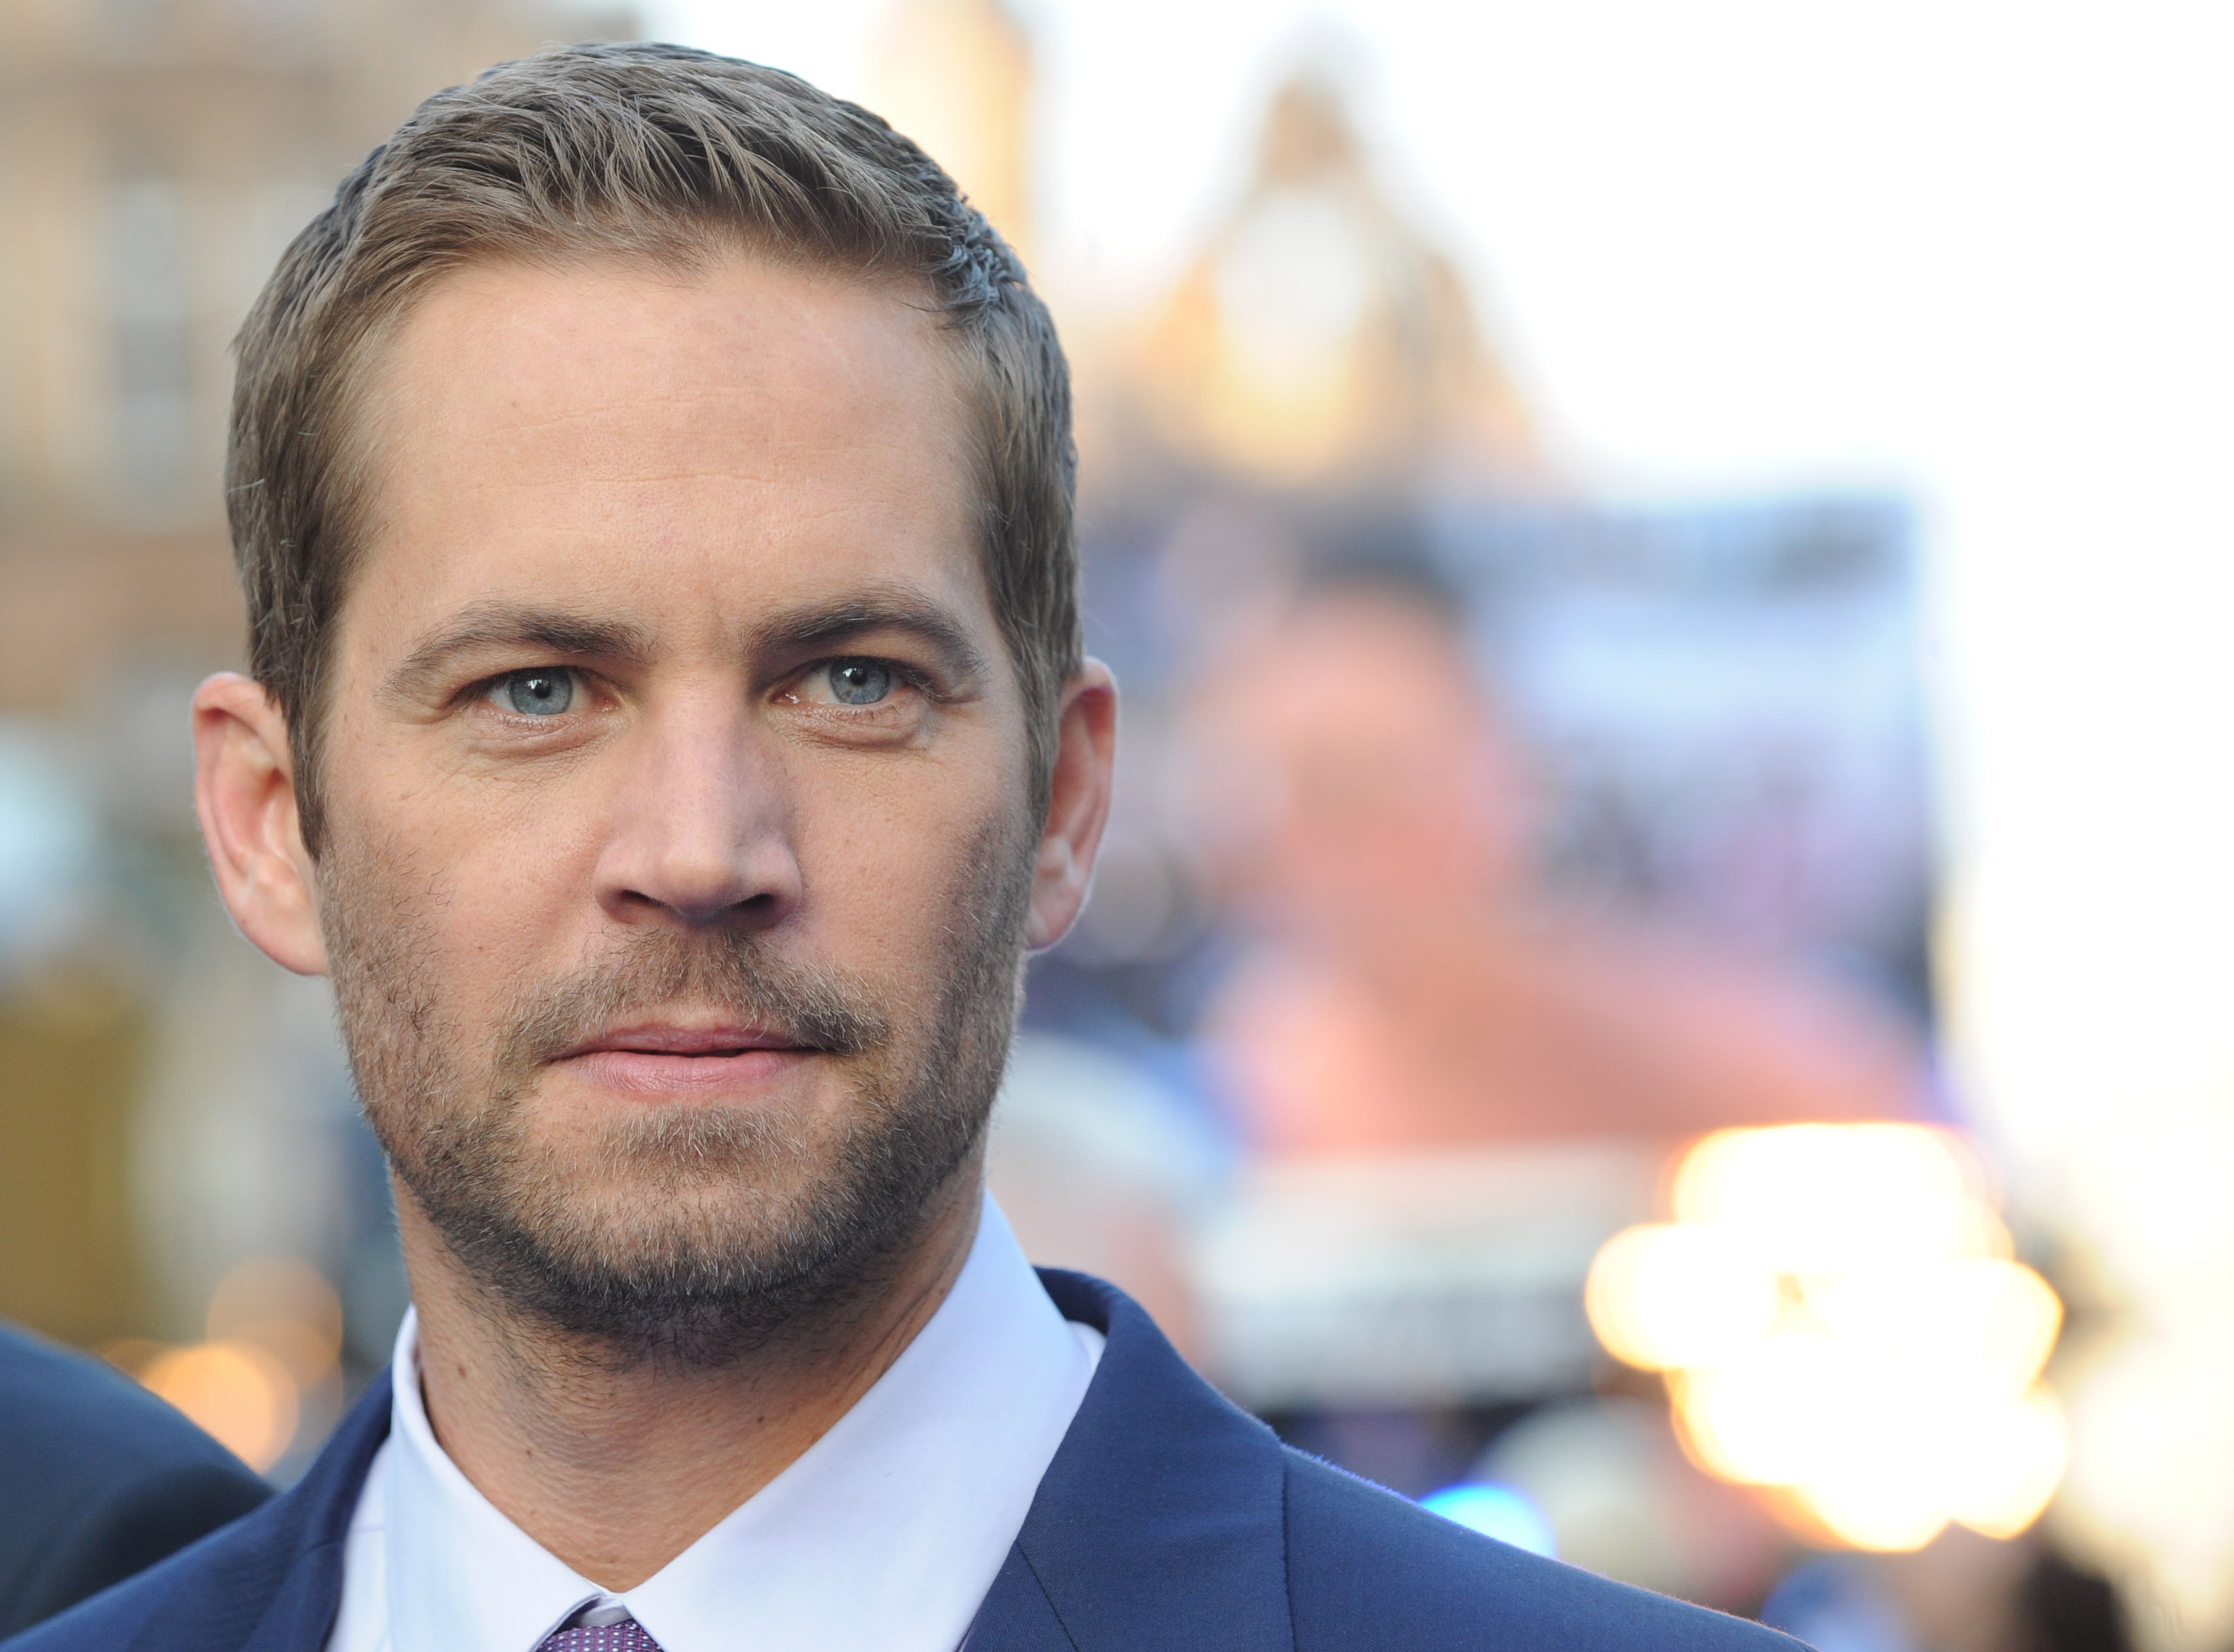 Paul Walker at the "Fast & Furious 6" World Premiere at The Empire, 2013, London, England. | Photo: Getty Images